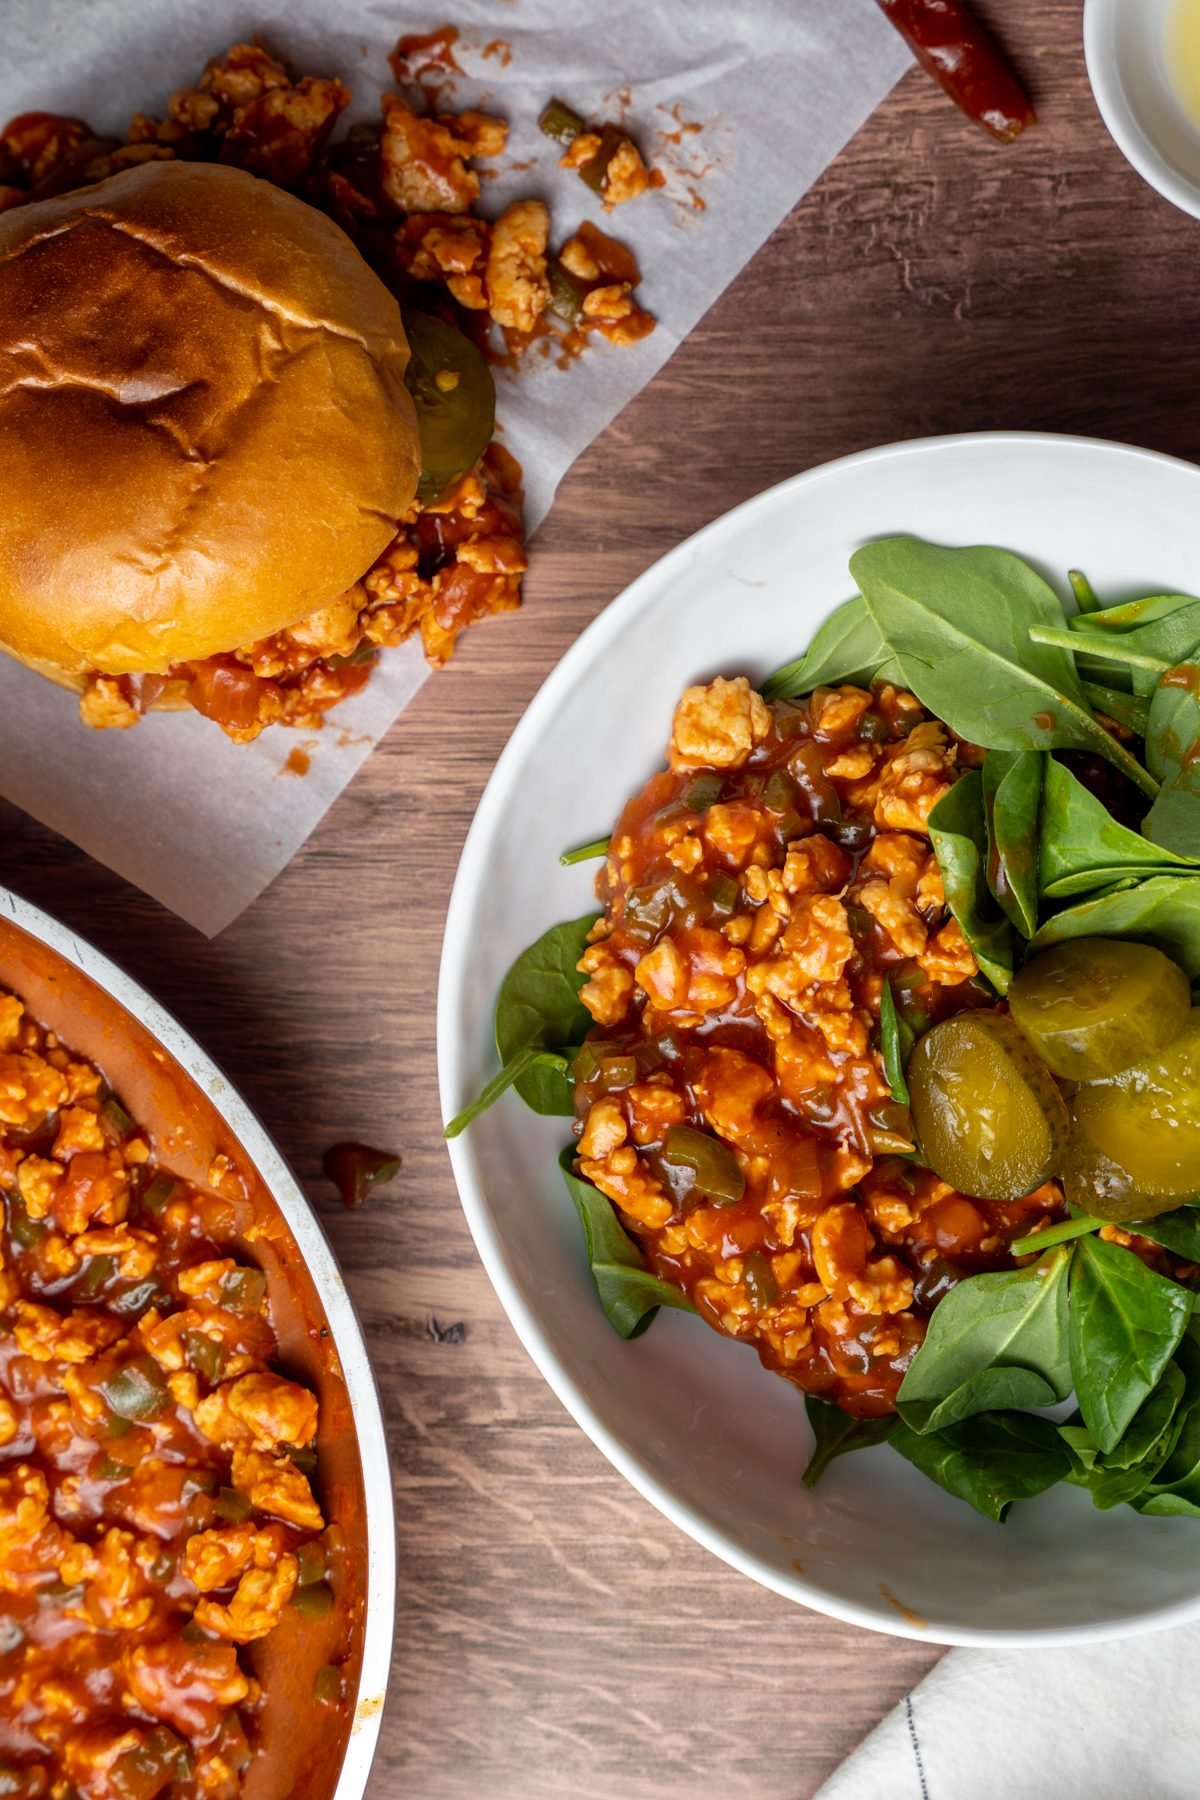 Ground chicken sloppy joe mix on a plate with greens.